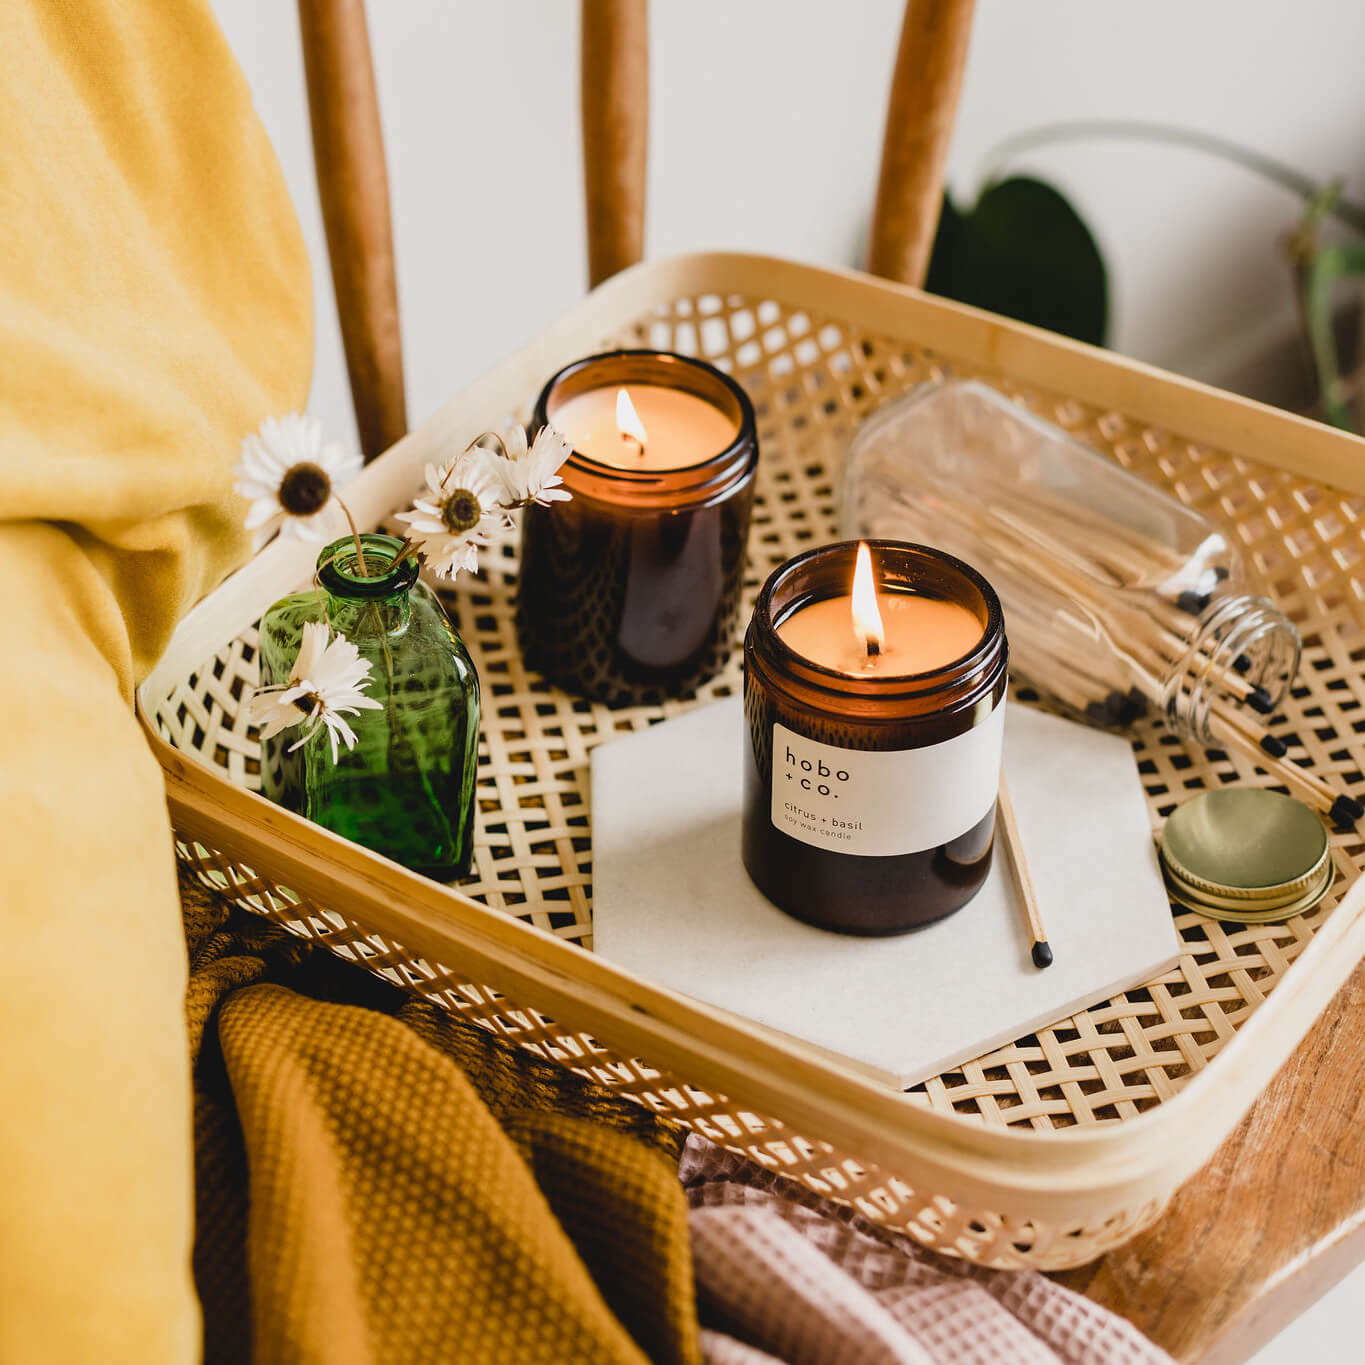 Citrus & Basil Scented Candle by Hobo & Co.